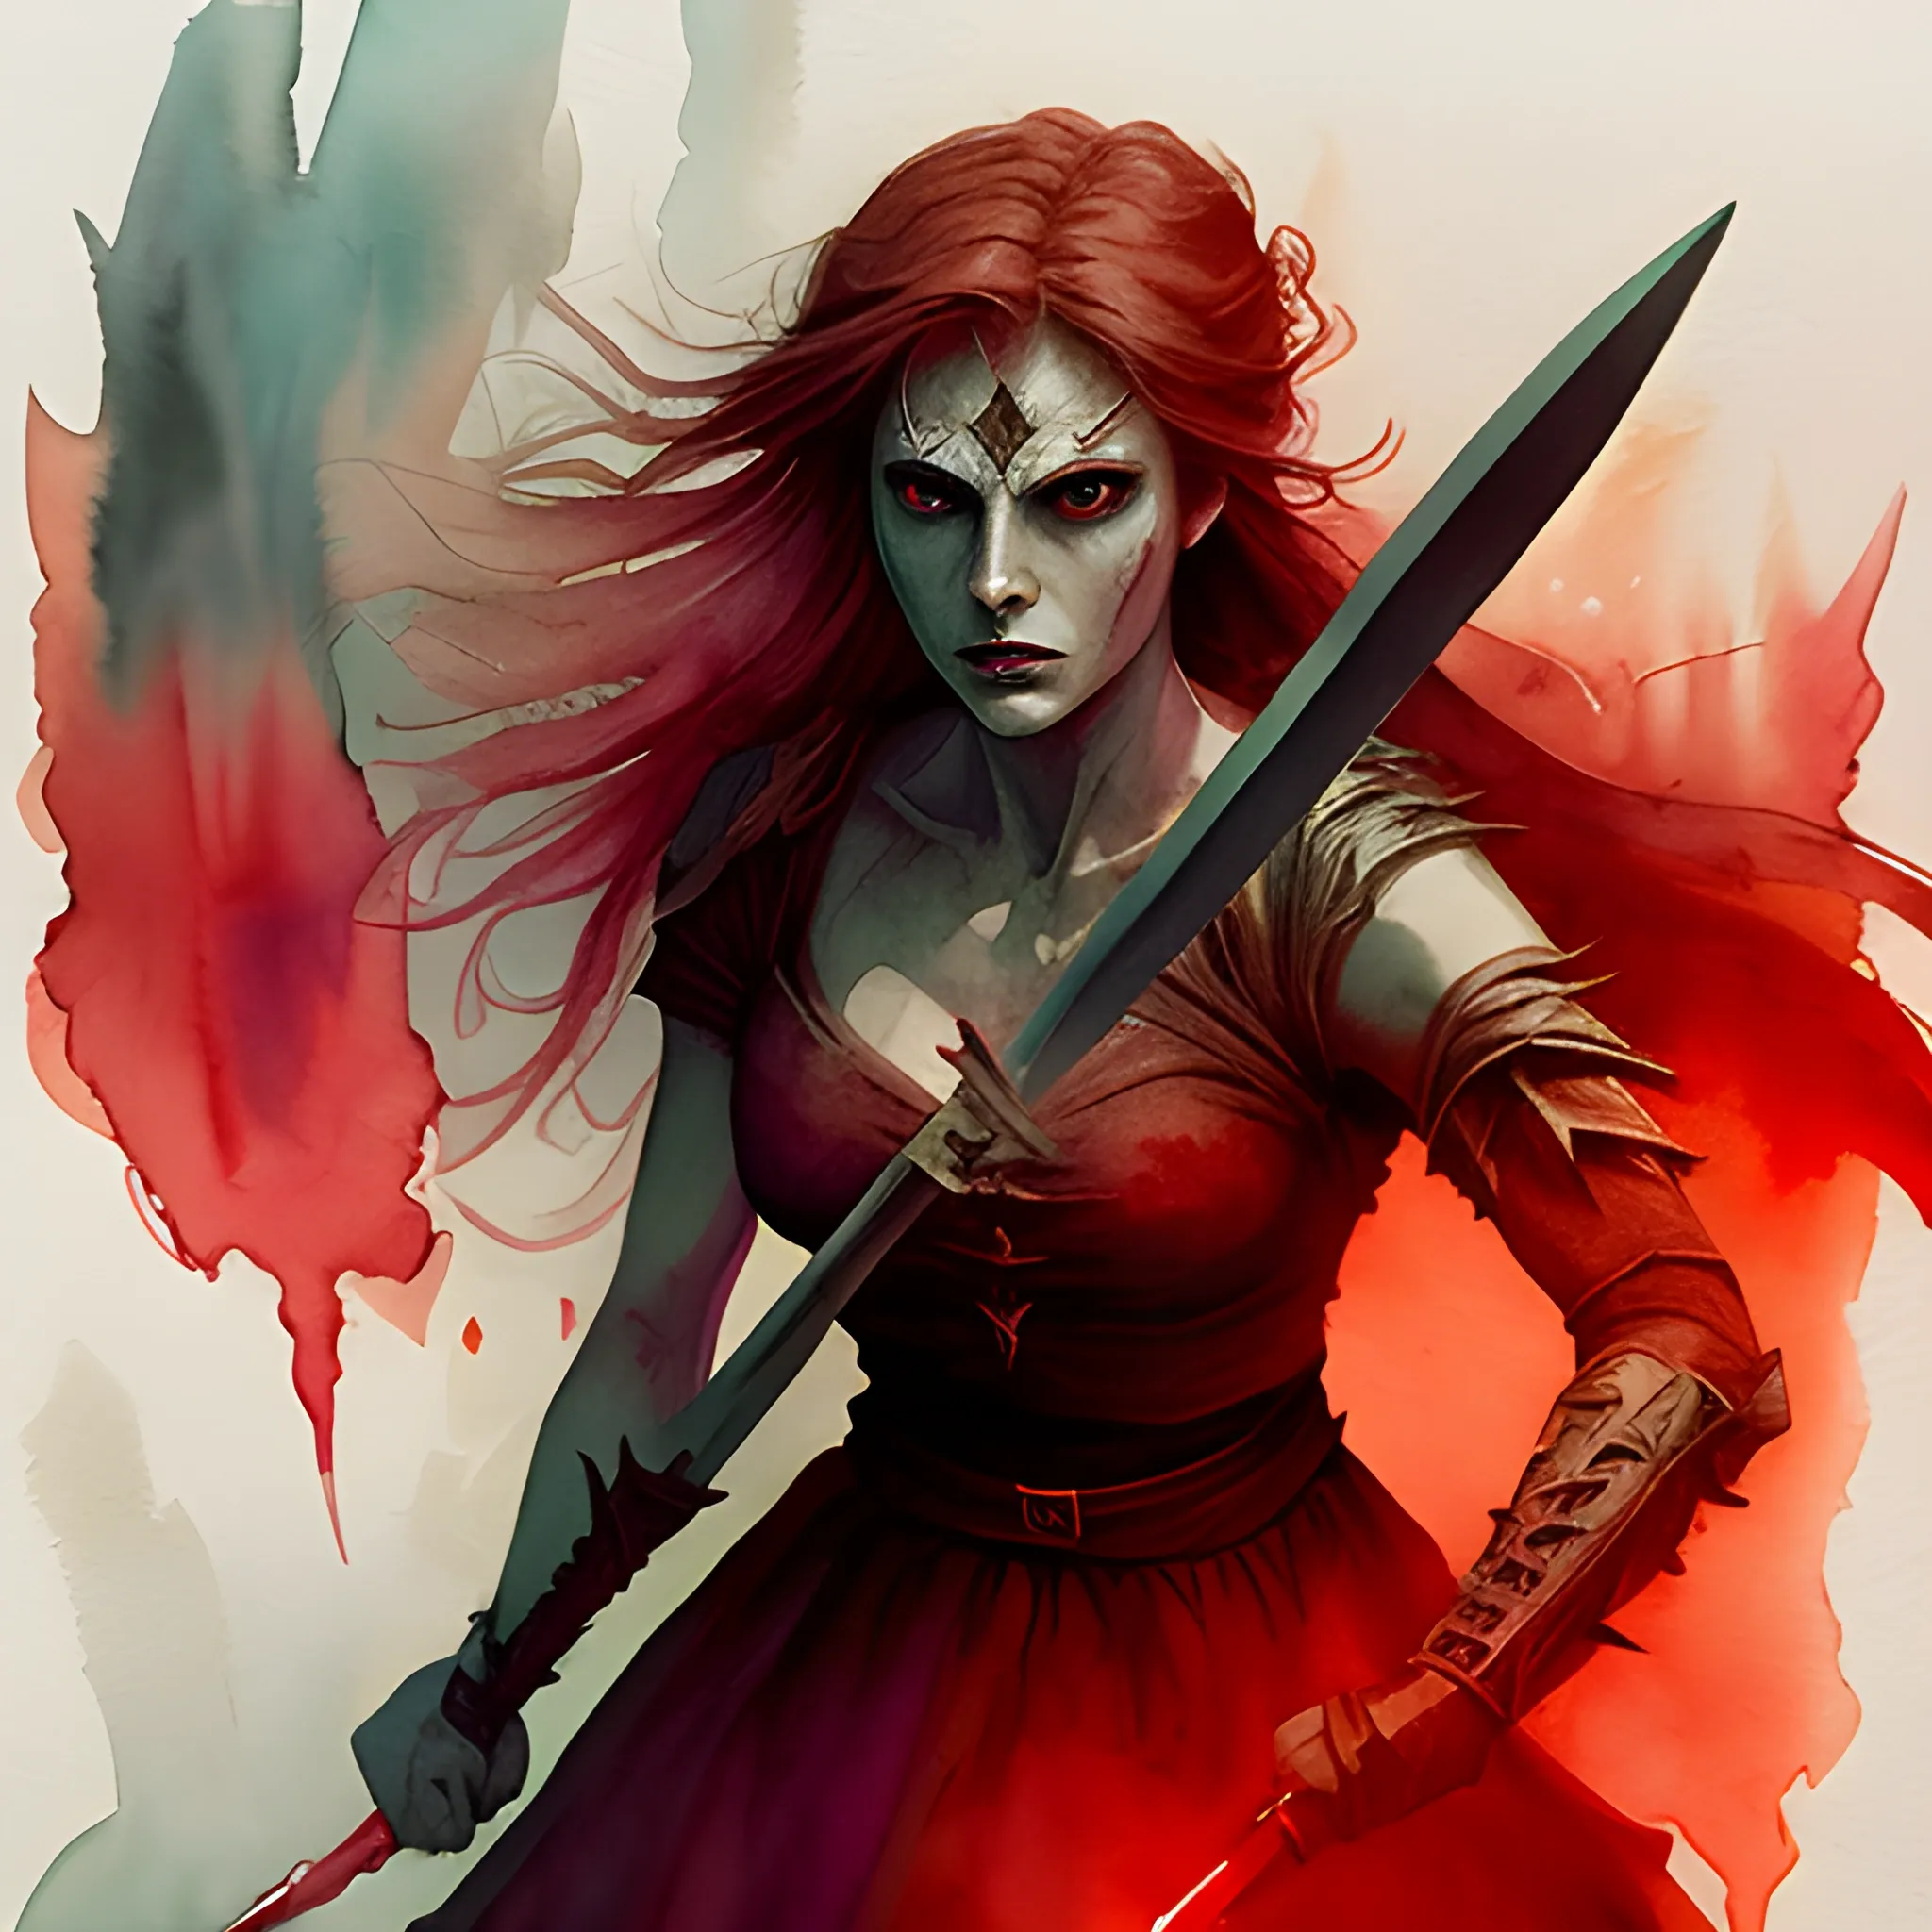 Illustrate a spellbinding scene featuring a fierce woman warrior, wielding a mystical dagger imbued with otherworldly powers, as she confronts supernatural creatures of the night. Utilize watercolor techniques reminiscent of the renowned painter J.M.W. Turner, with the predominant use of the color red to enhance the magical atmosphere